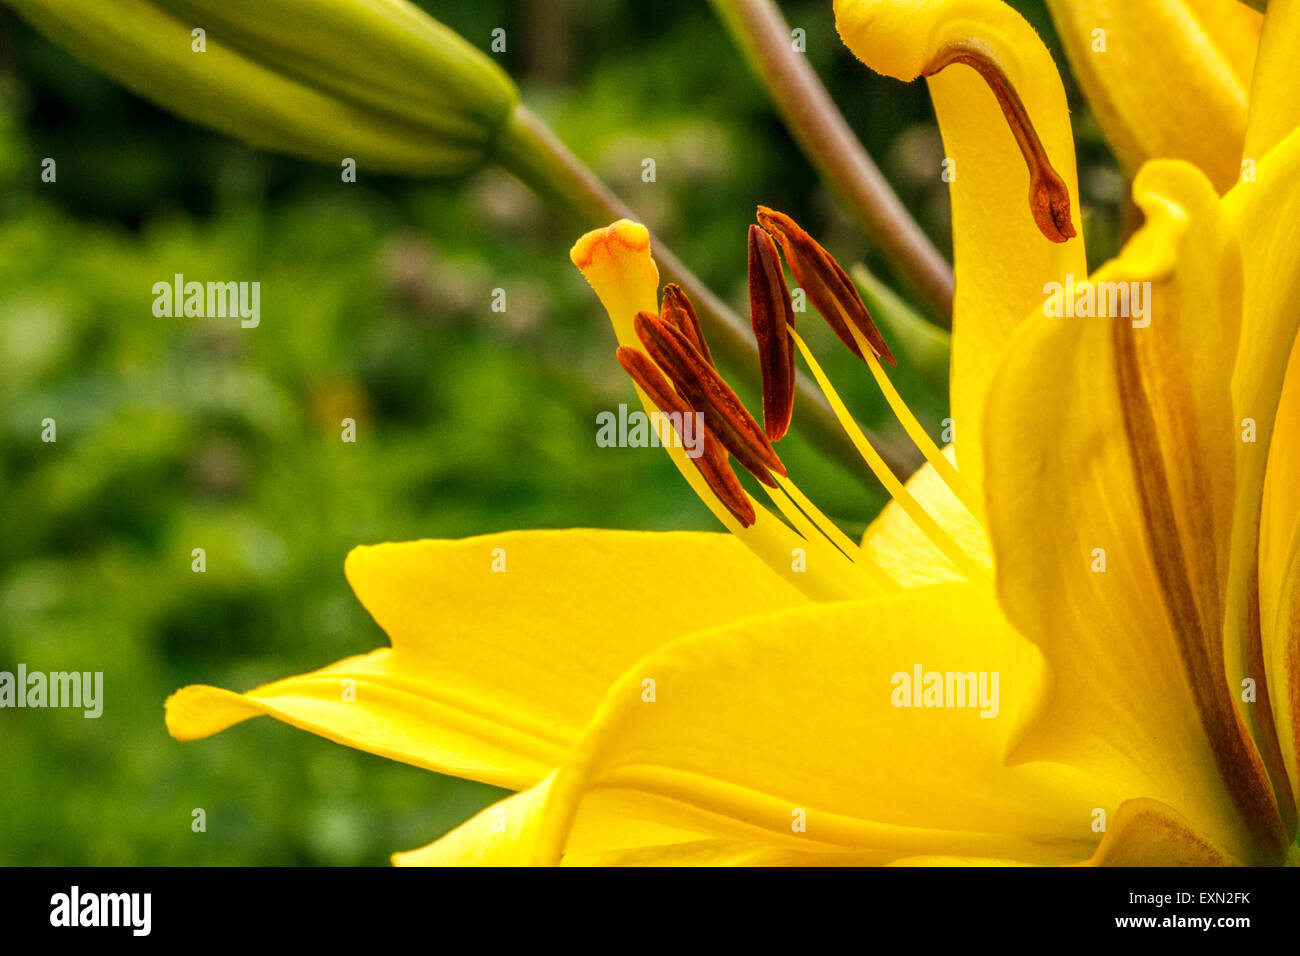 Lily flower head Stock Photo